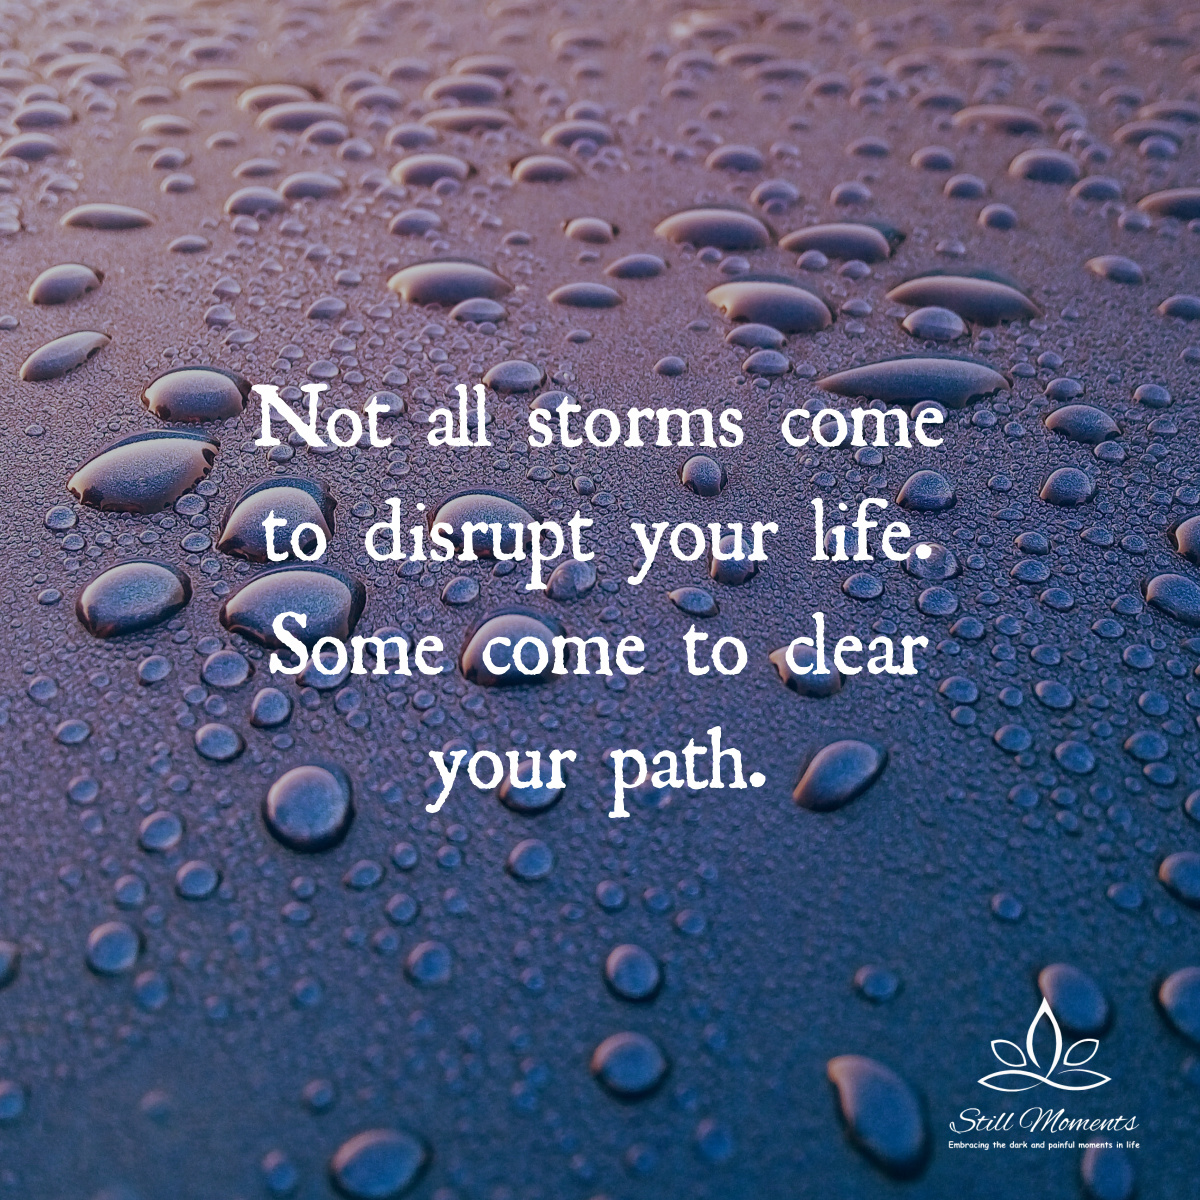 Not All Storms Come To Disrupt Your Life - Still Moments